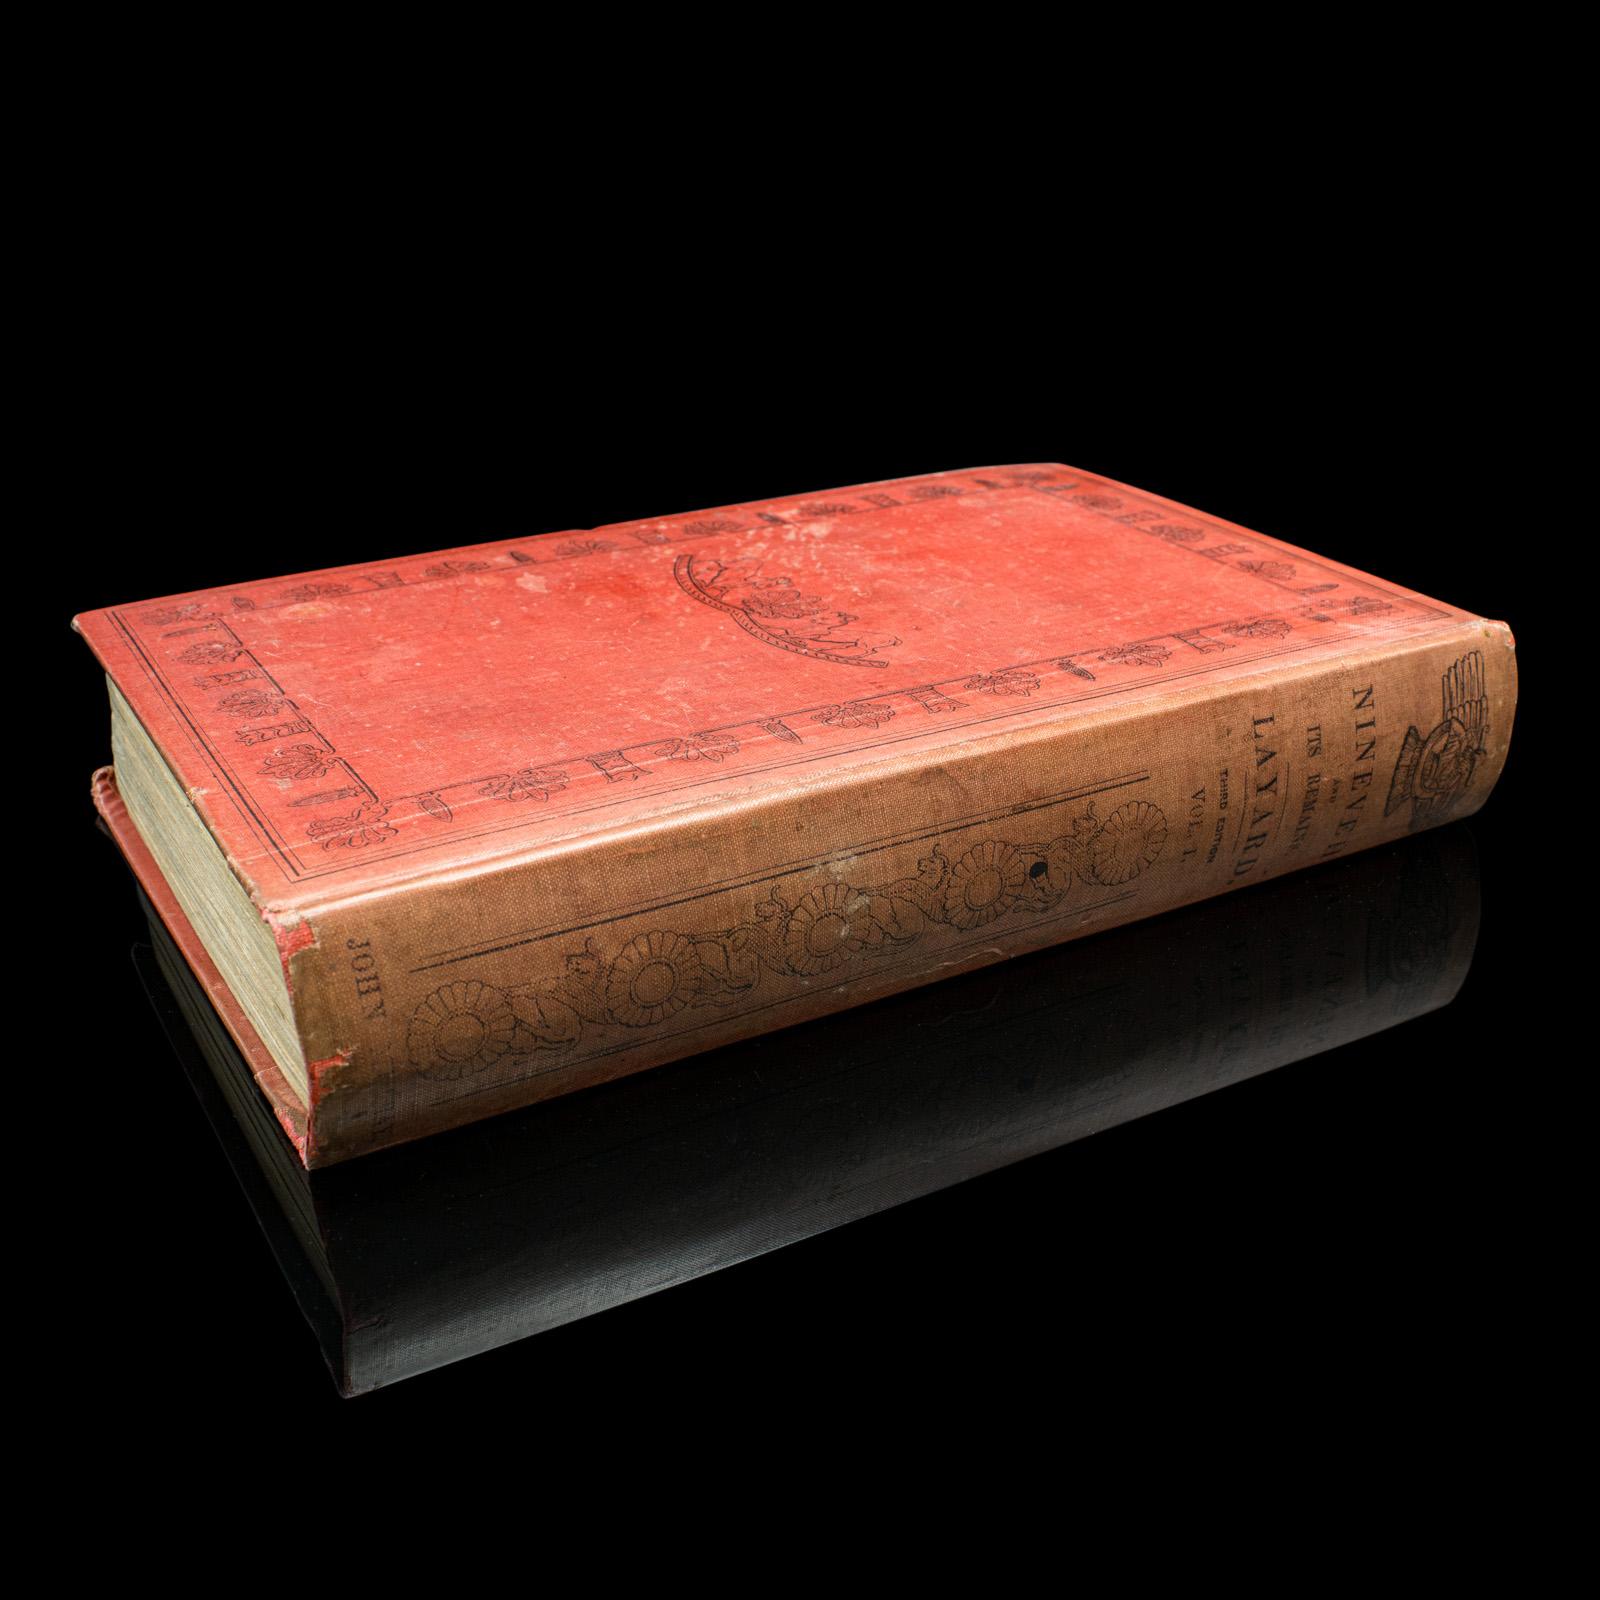 
This is an antique second edition copy of Nineveh and its Remains - Volume 1 by Austen Henry Layard. An English, bound copy of the historic findings in Assyria, published in London in 1849.

A fascinating individual, Sir Austen Henry Layard (1817 -